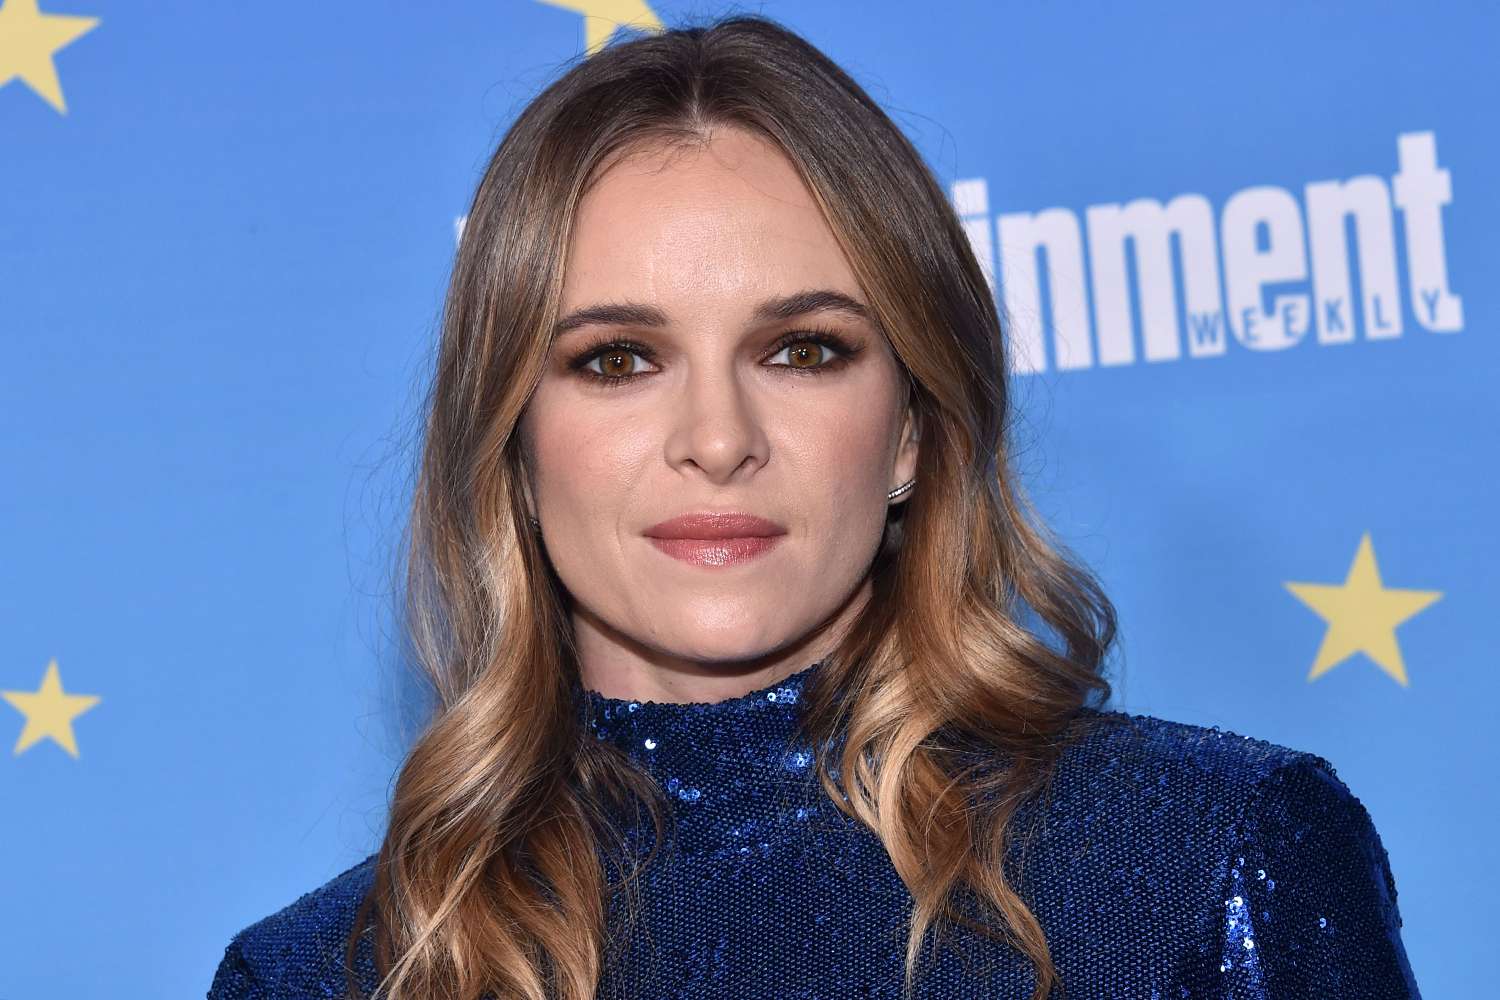 Danielle Panabaker Welcomes Second Baby with Husband: 'Basking In All the Love'